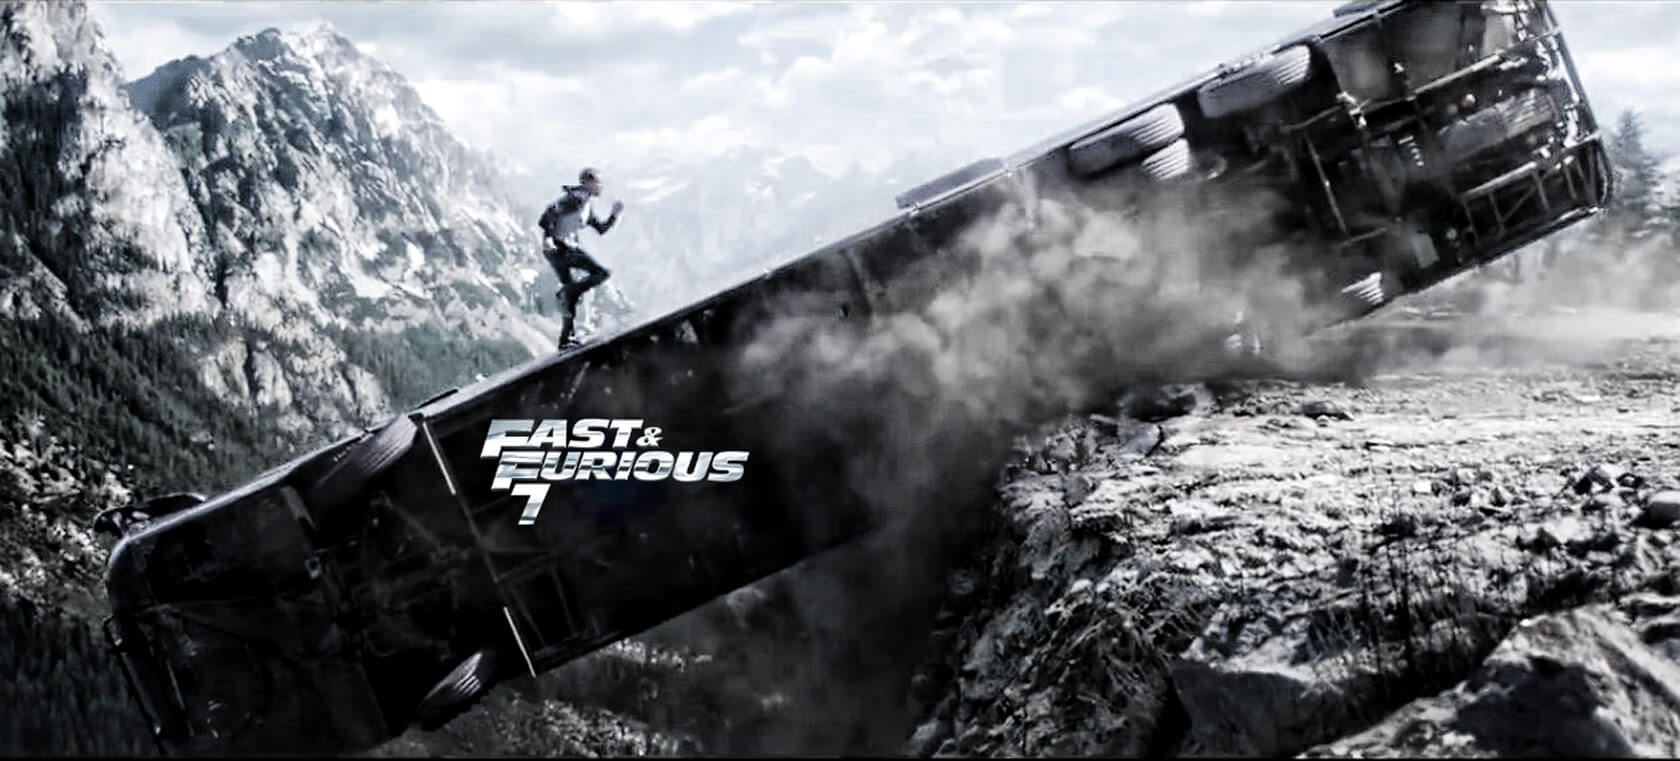 Fast and Furious 7 Opening Day Collection